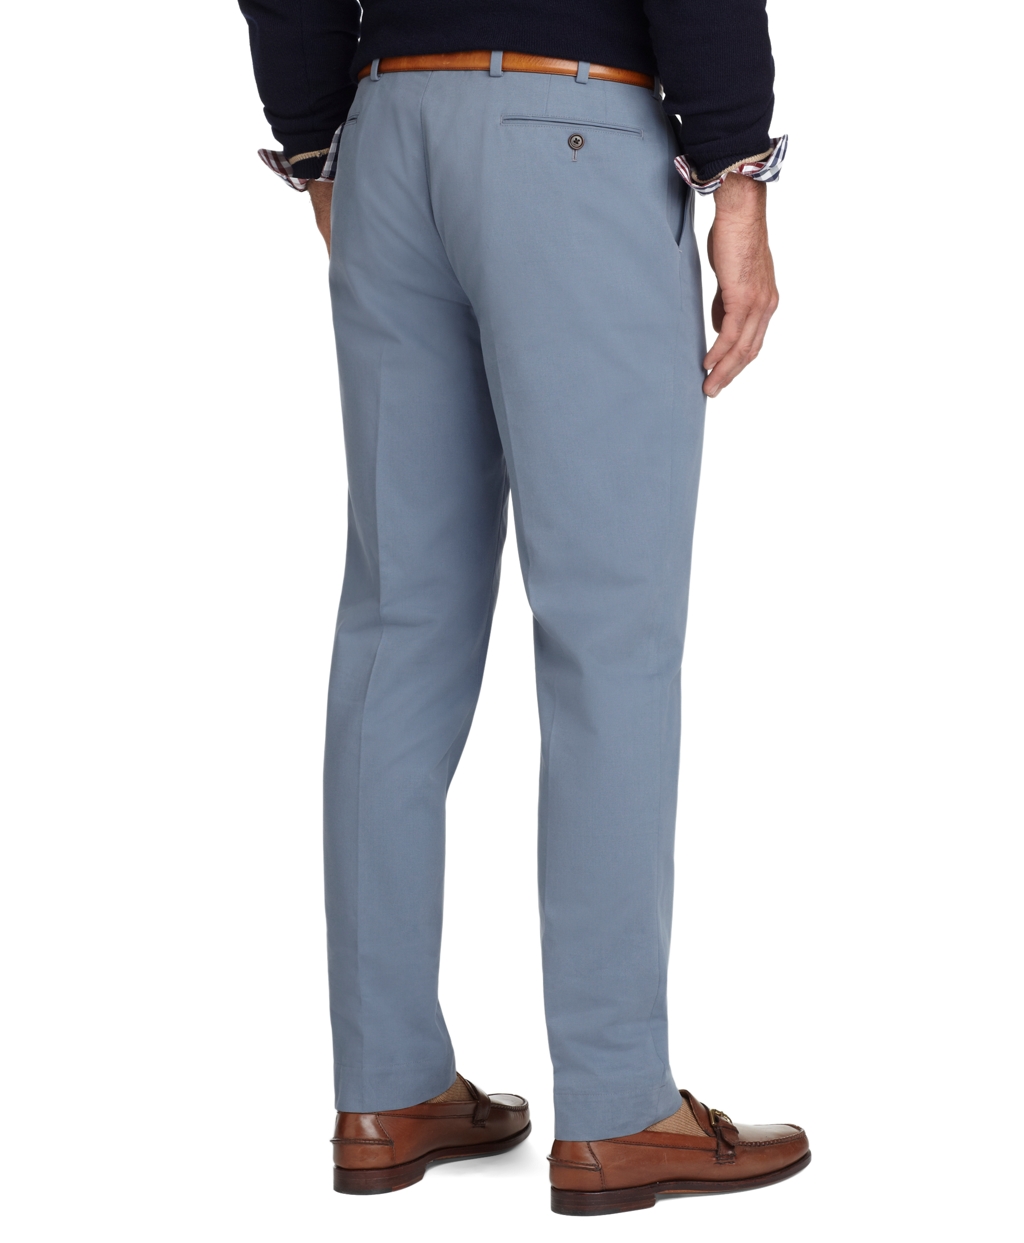 Lyst - Brooks Brothers Milano Fit Cotton Twill Pants in Blue for Men